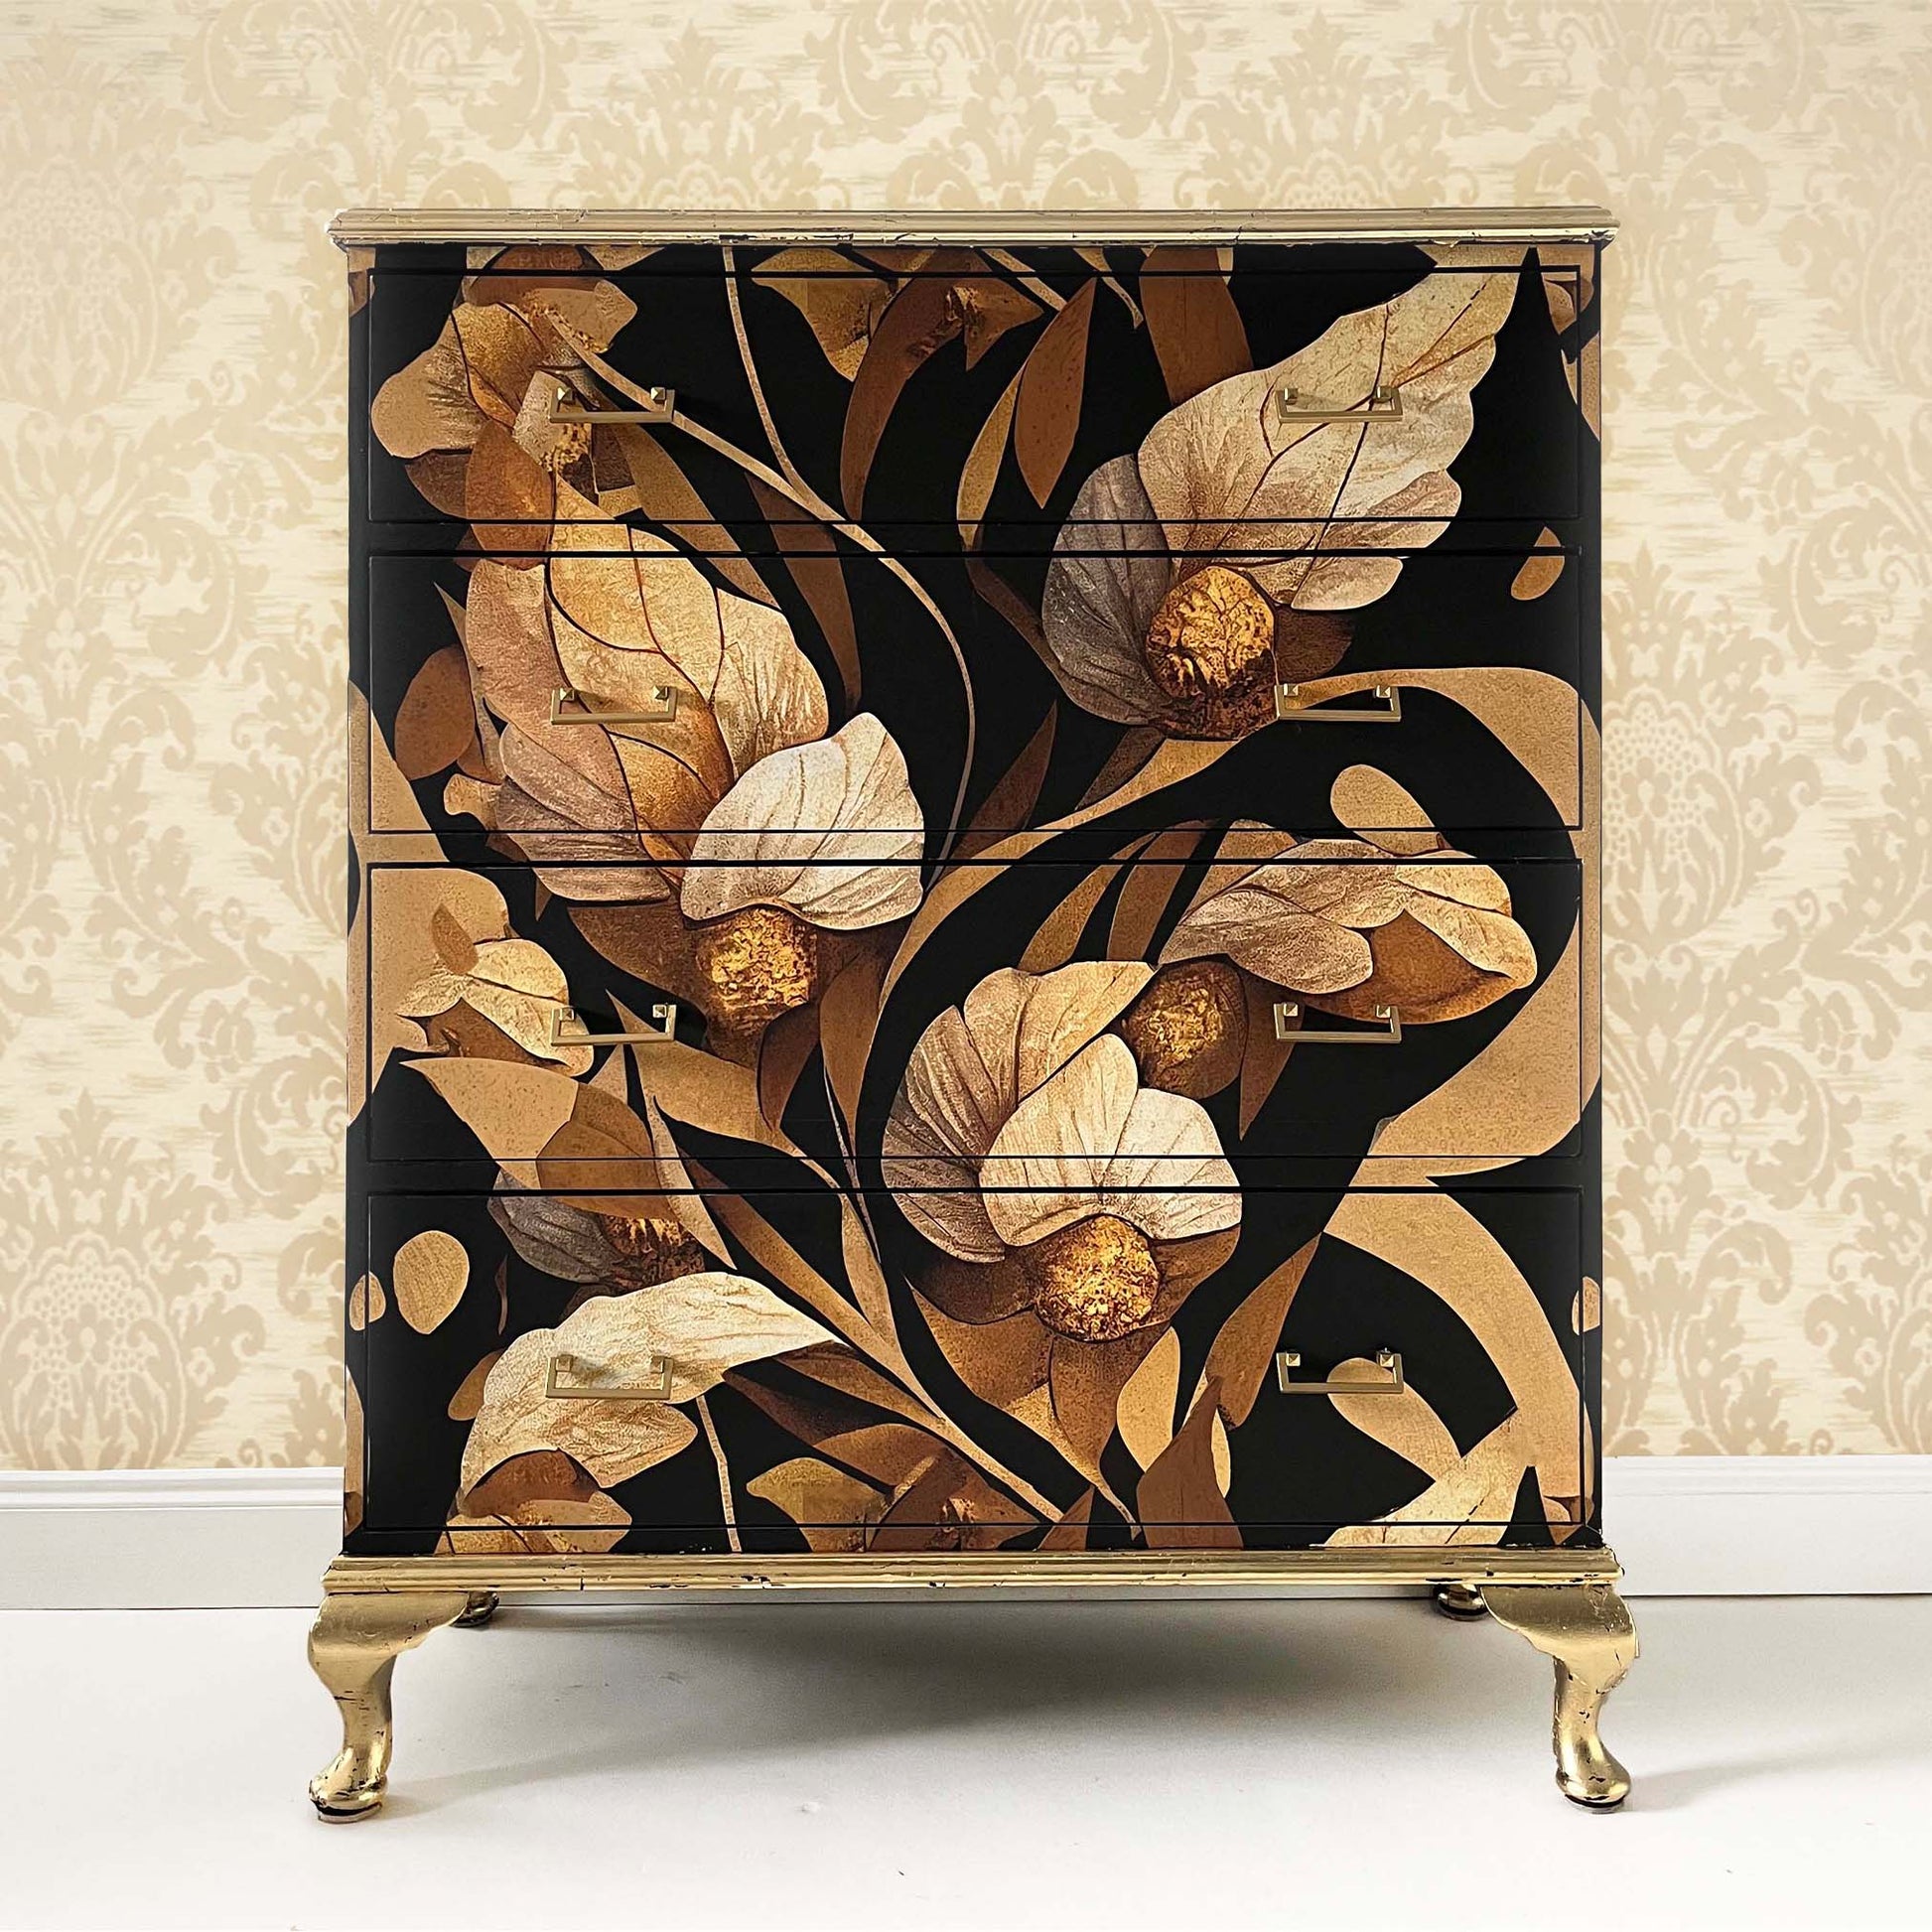 Antique upcycled chest of drawers decorated bespoke oriental pattern, legs and frame gold guilded, modern brass handles on all 4 four drawers  